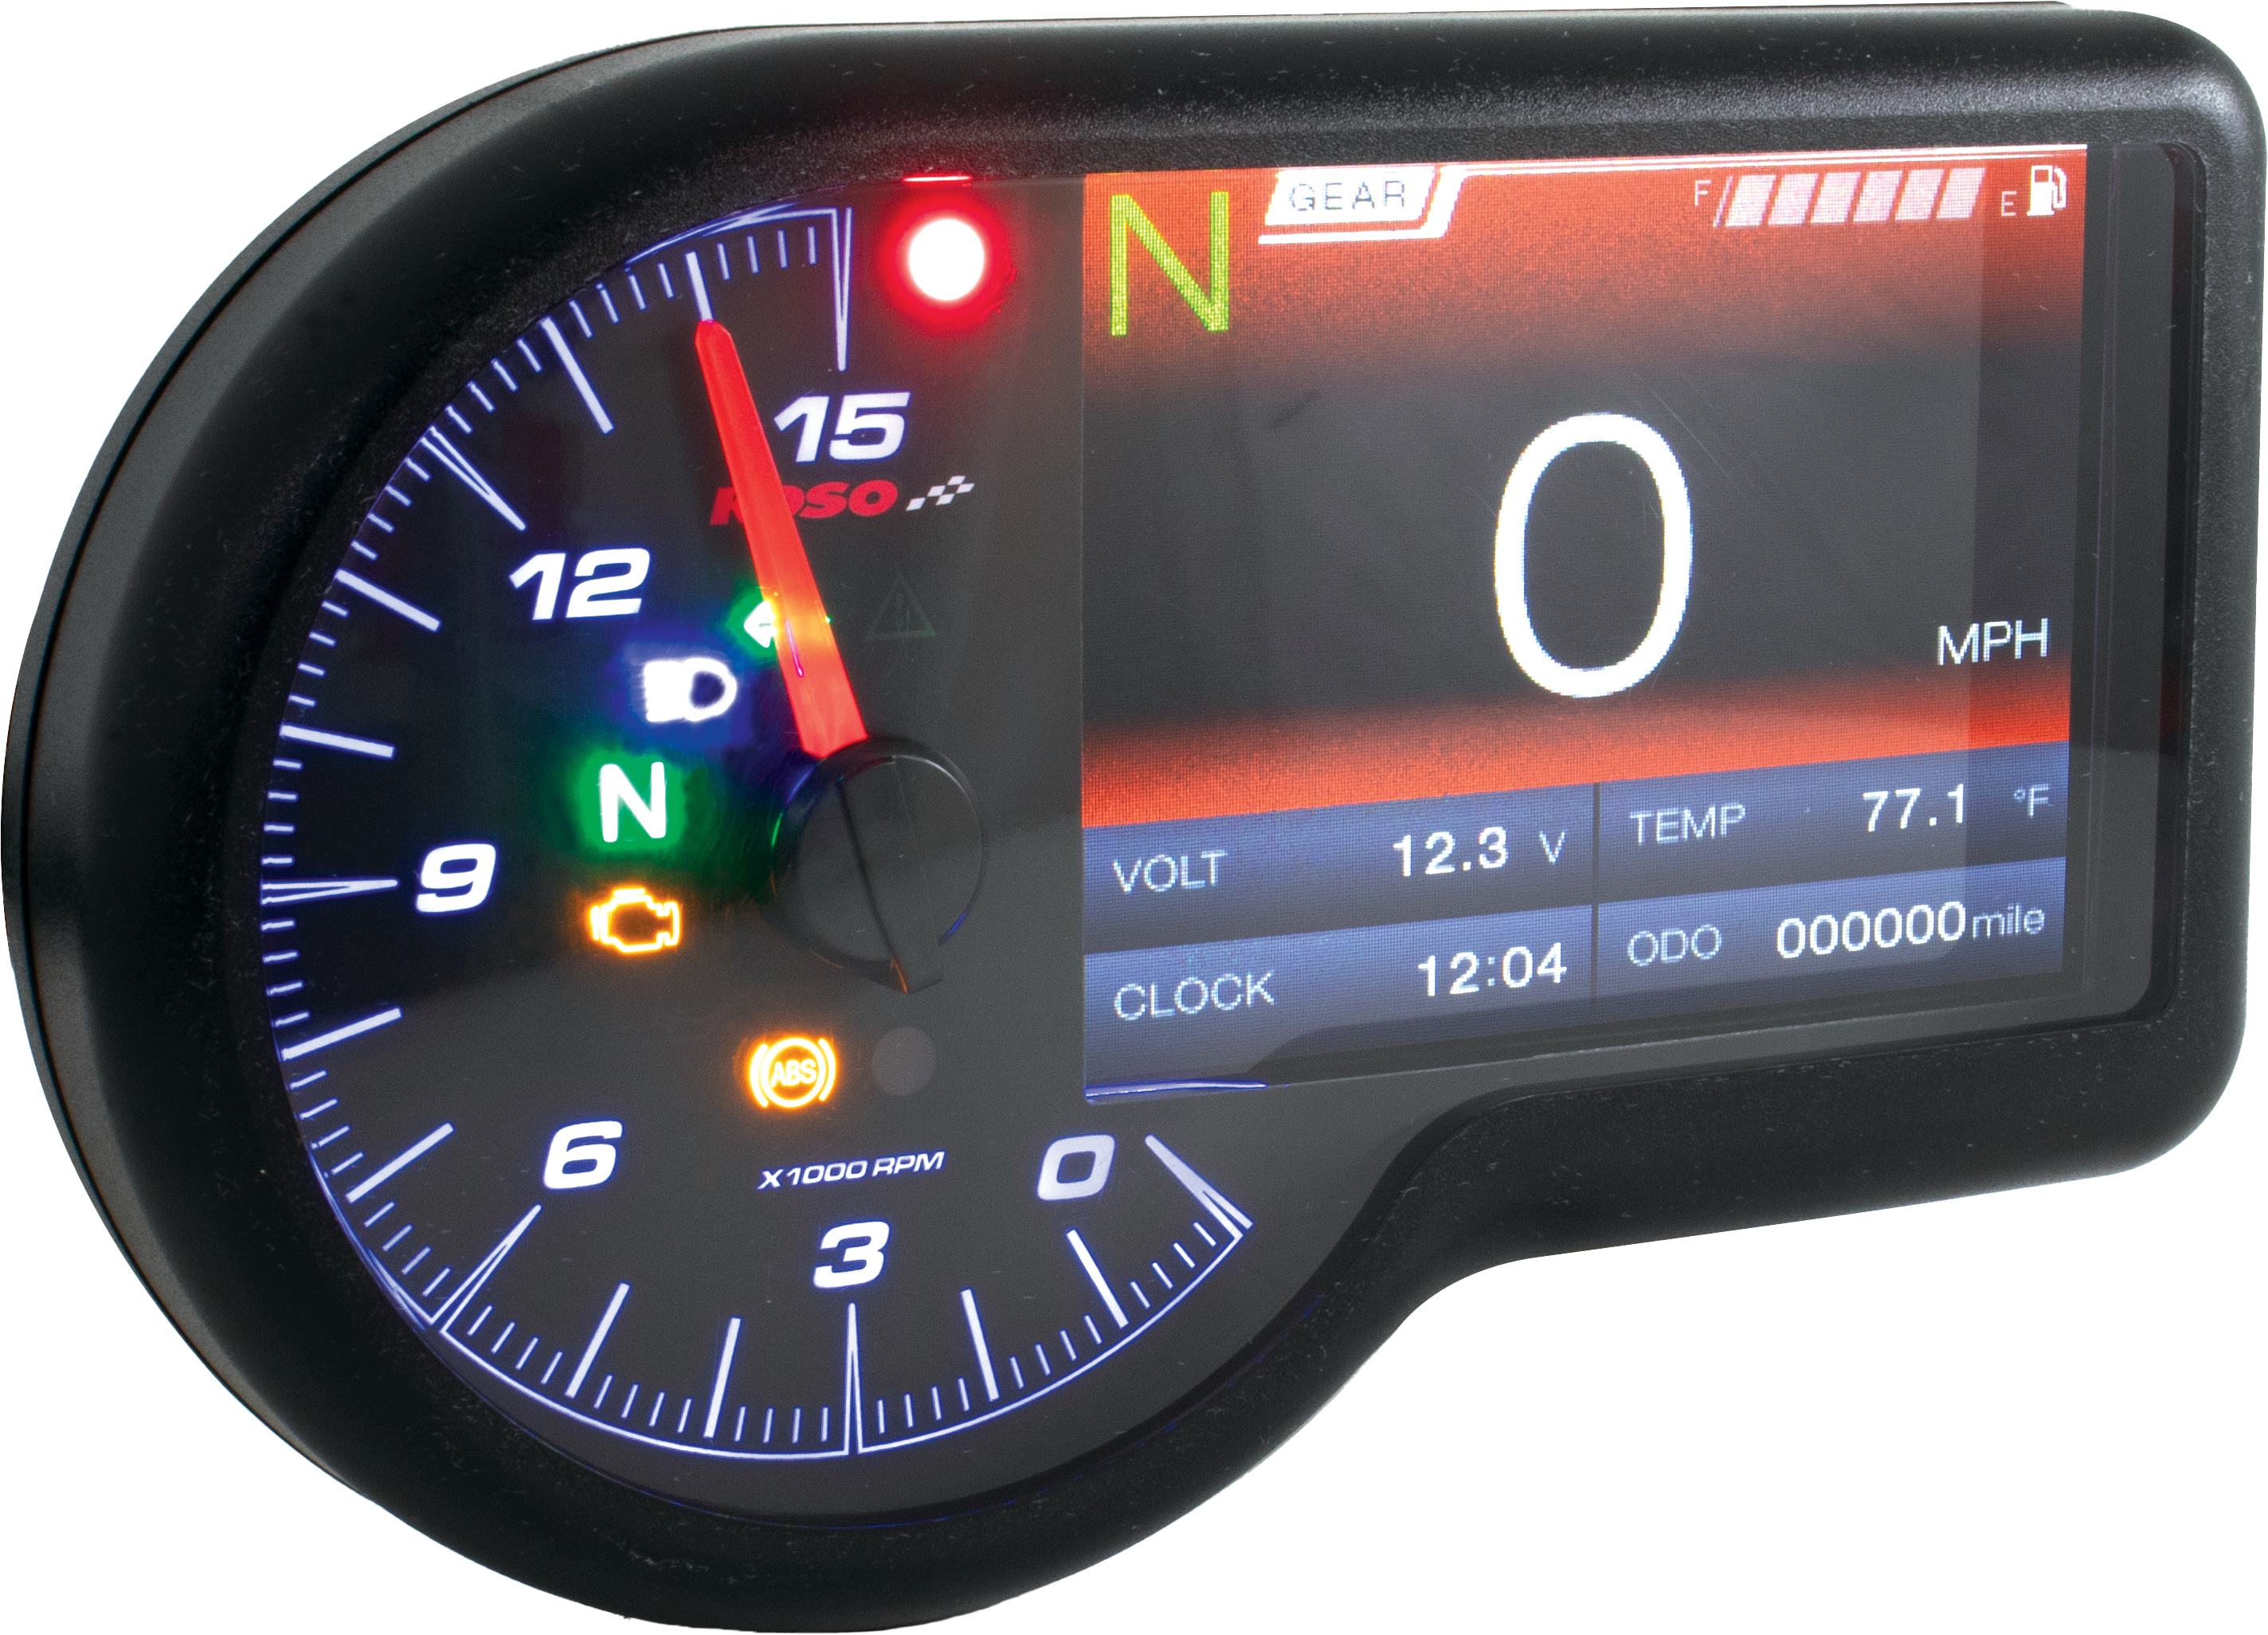 RX-3 GP Style TFT Multifunction Gauge w/ Mount and PNP Harness - For Honda Monkey - Click Image to Close